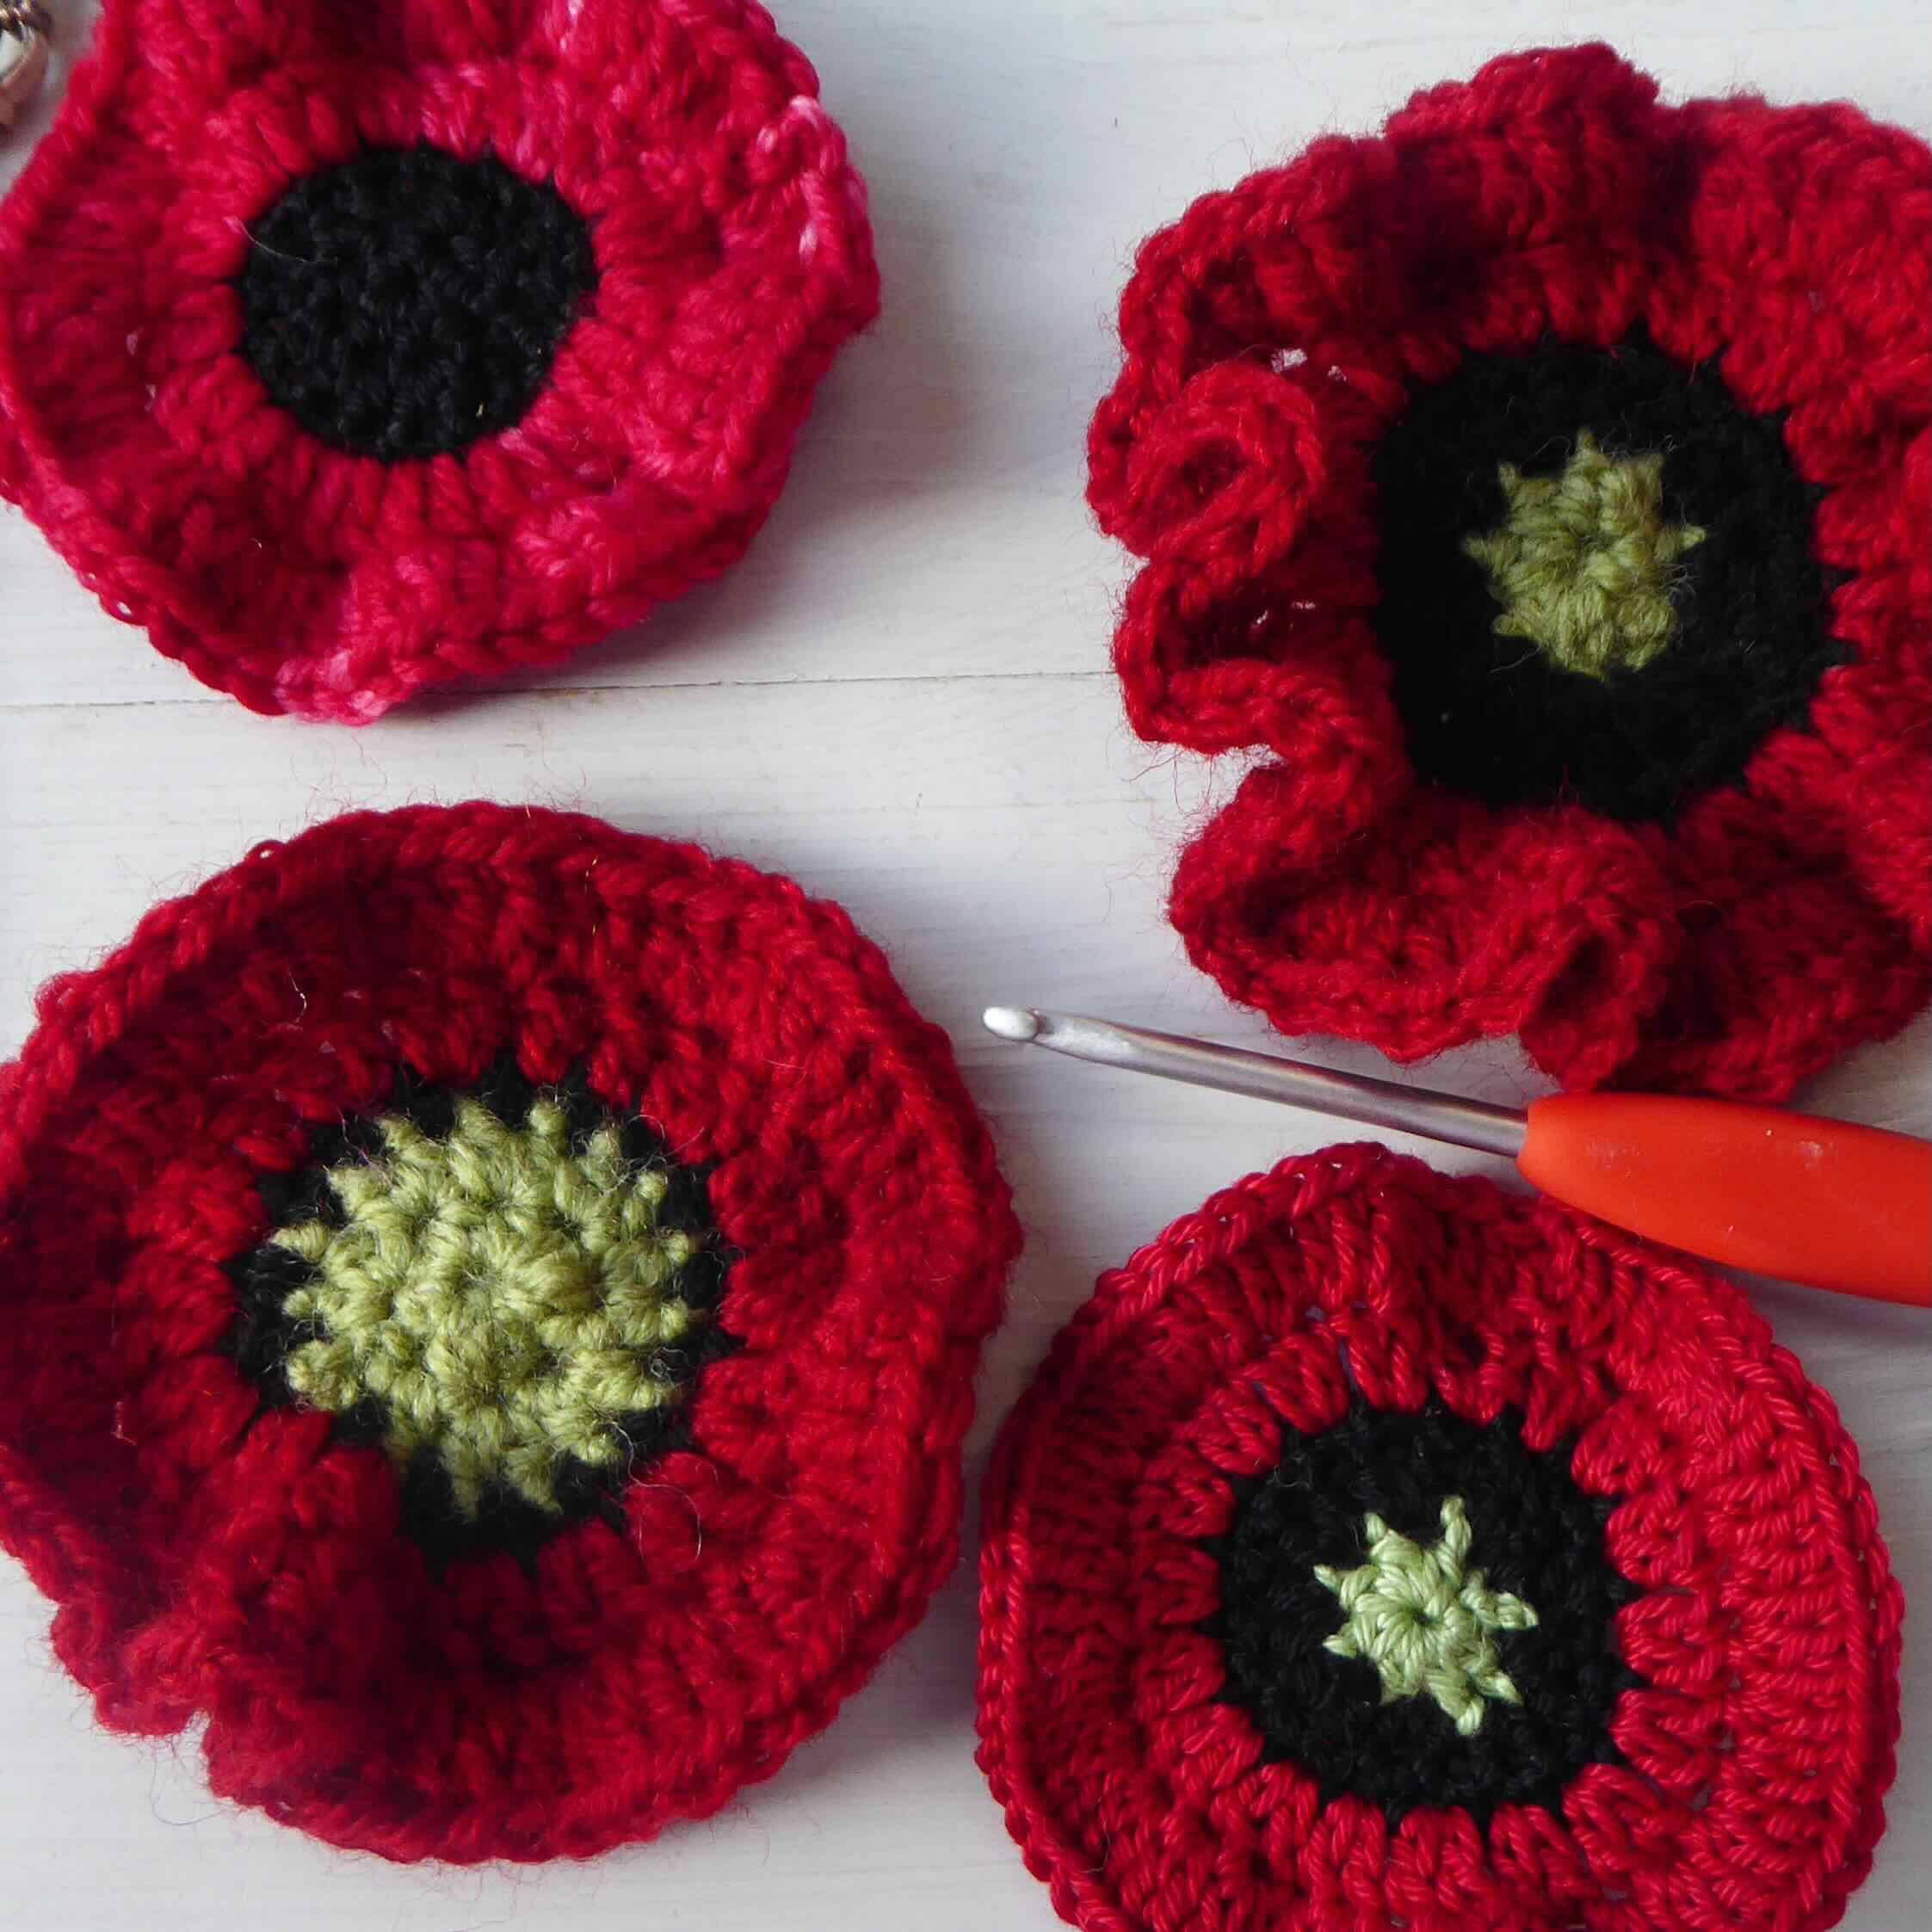 crochet poppy patterns - easy and quick